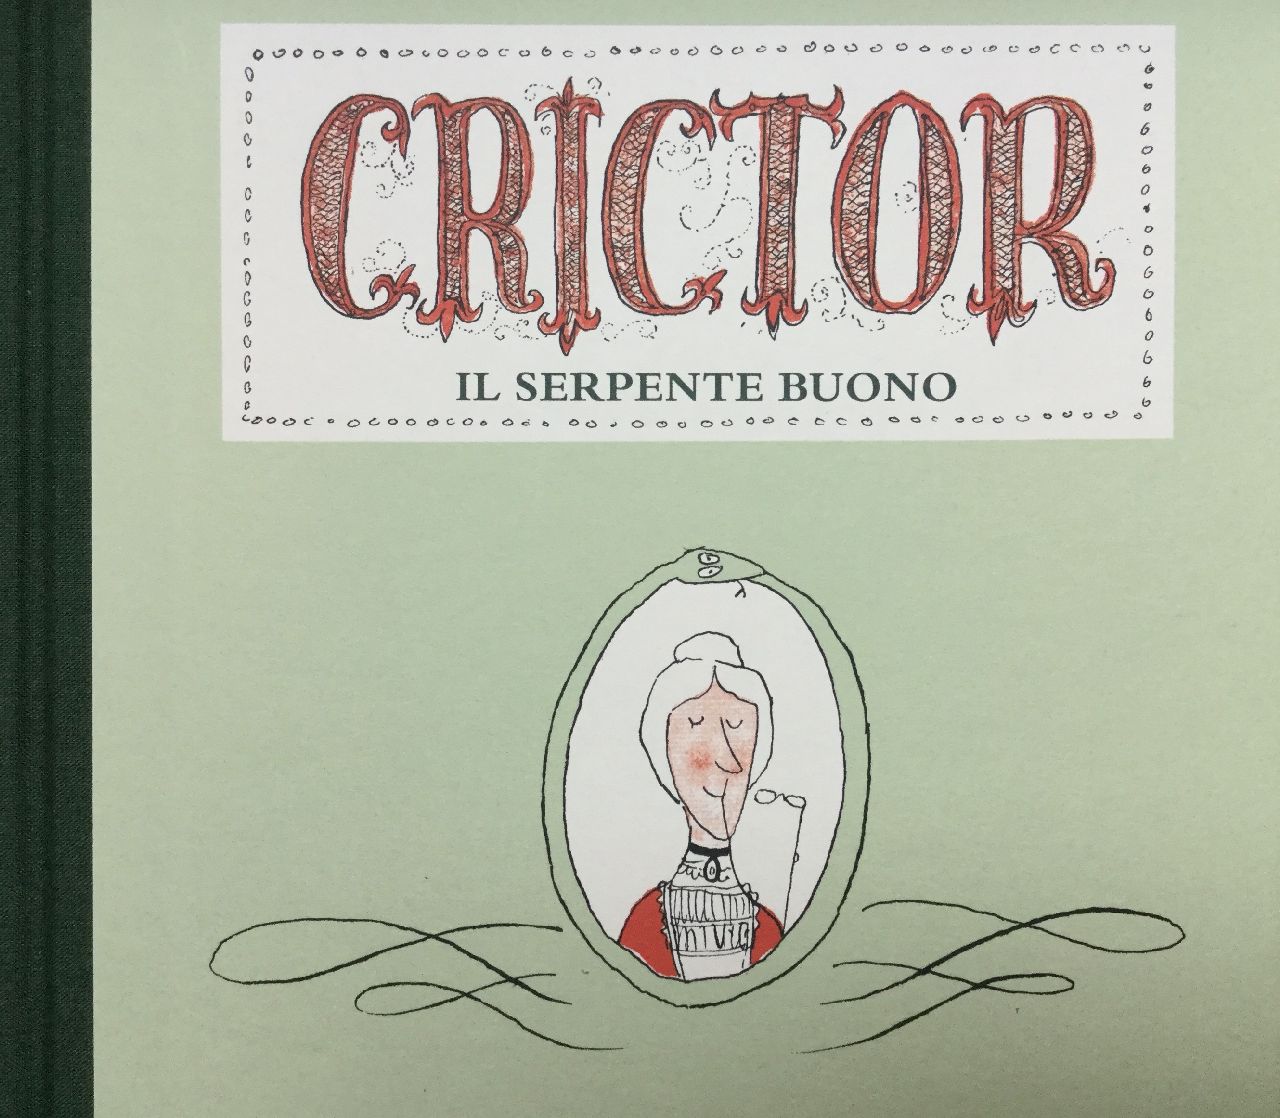 Tomi Ungerer, Crictor, Lupo Guido